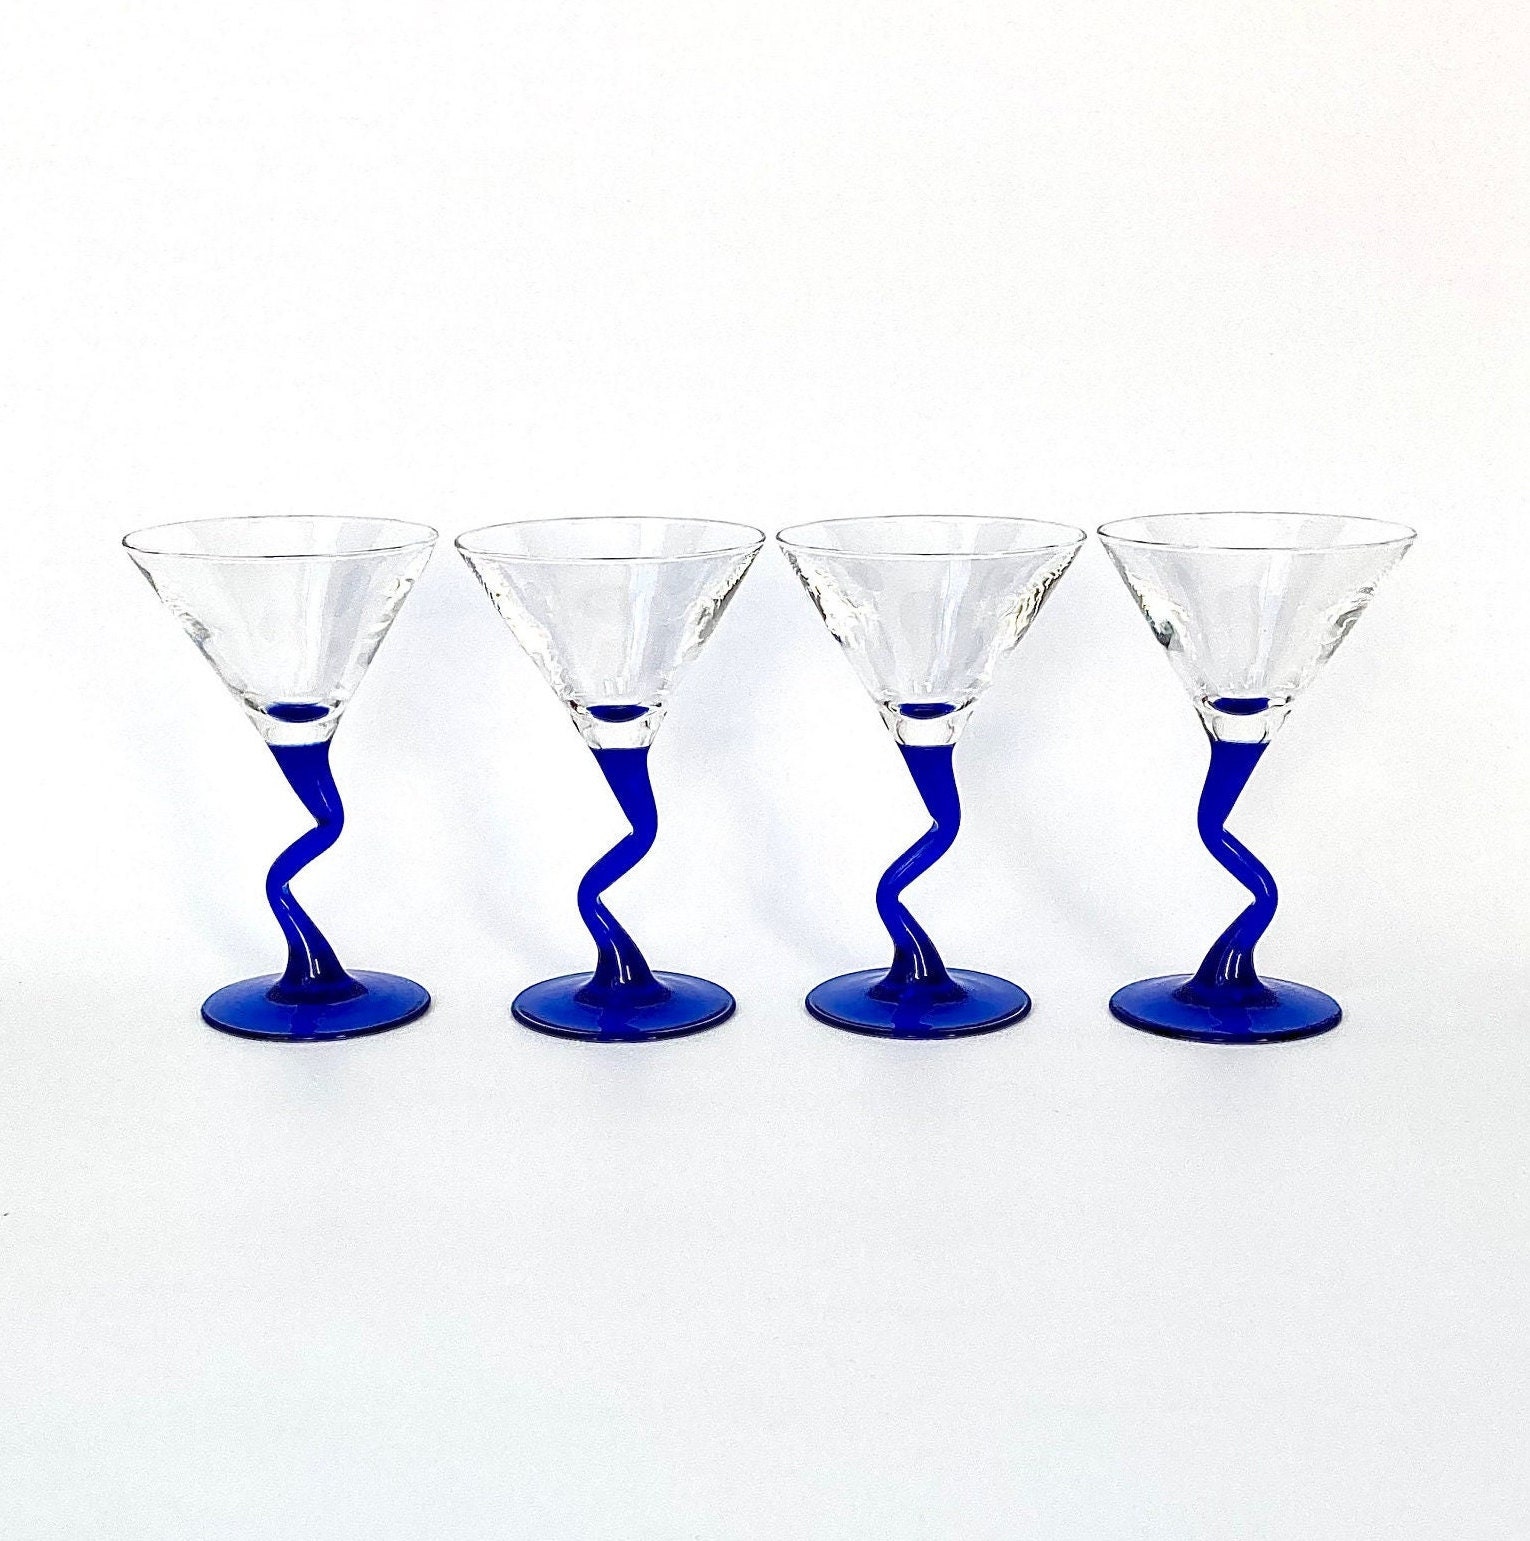 GAC Large Martini Glasses Set of 4 Cocktail Glasses for Martini Set,  Beautiful Colored Martini Glass with Gold Dots, Unique Design Thick Clear Glassware  Martinis 